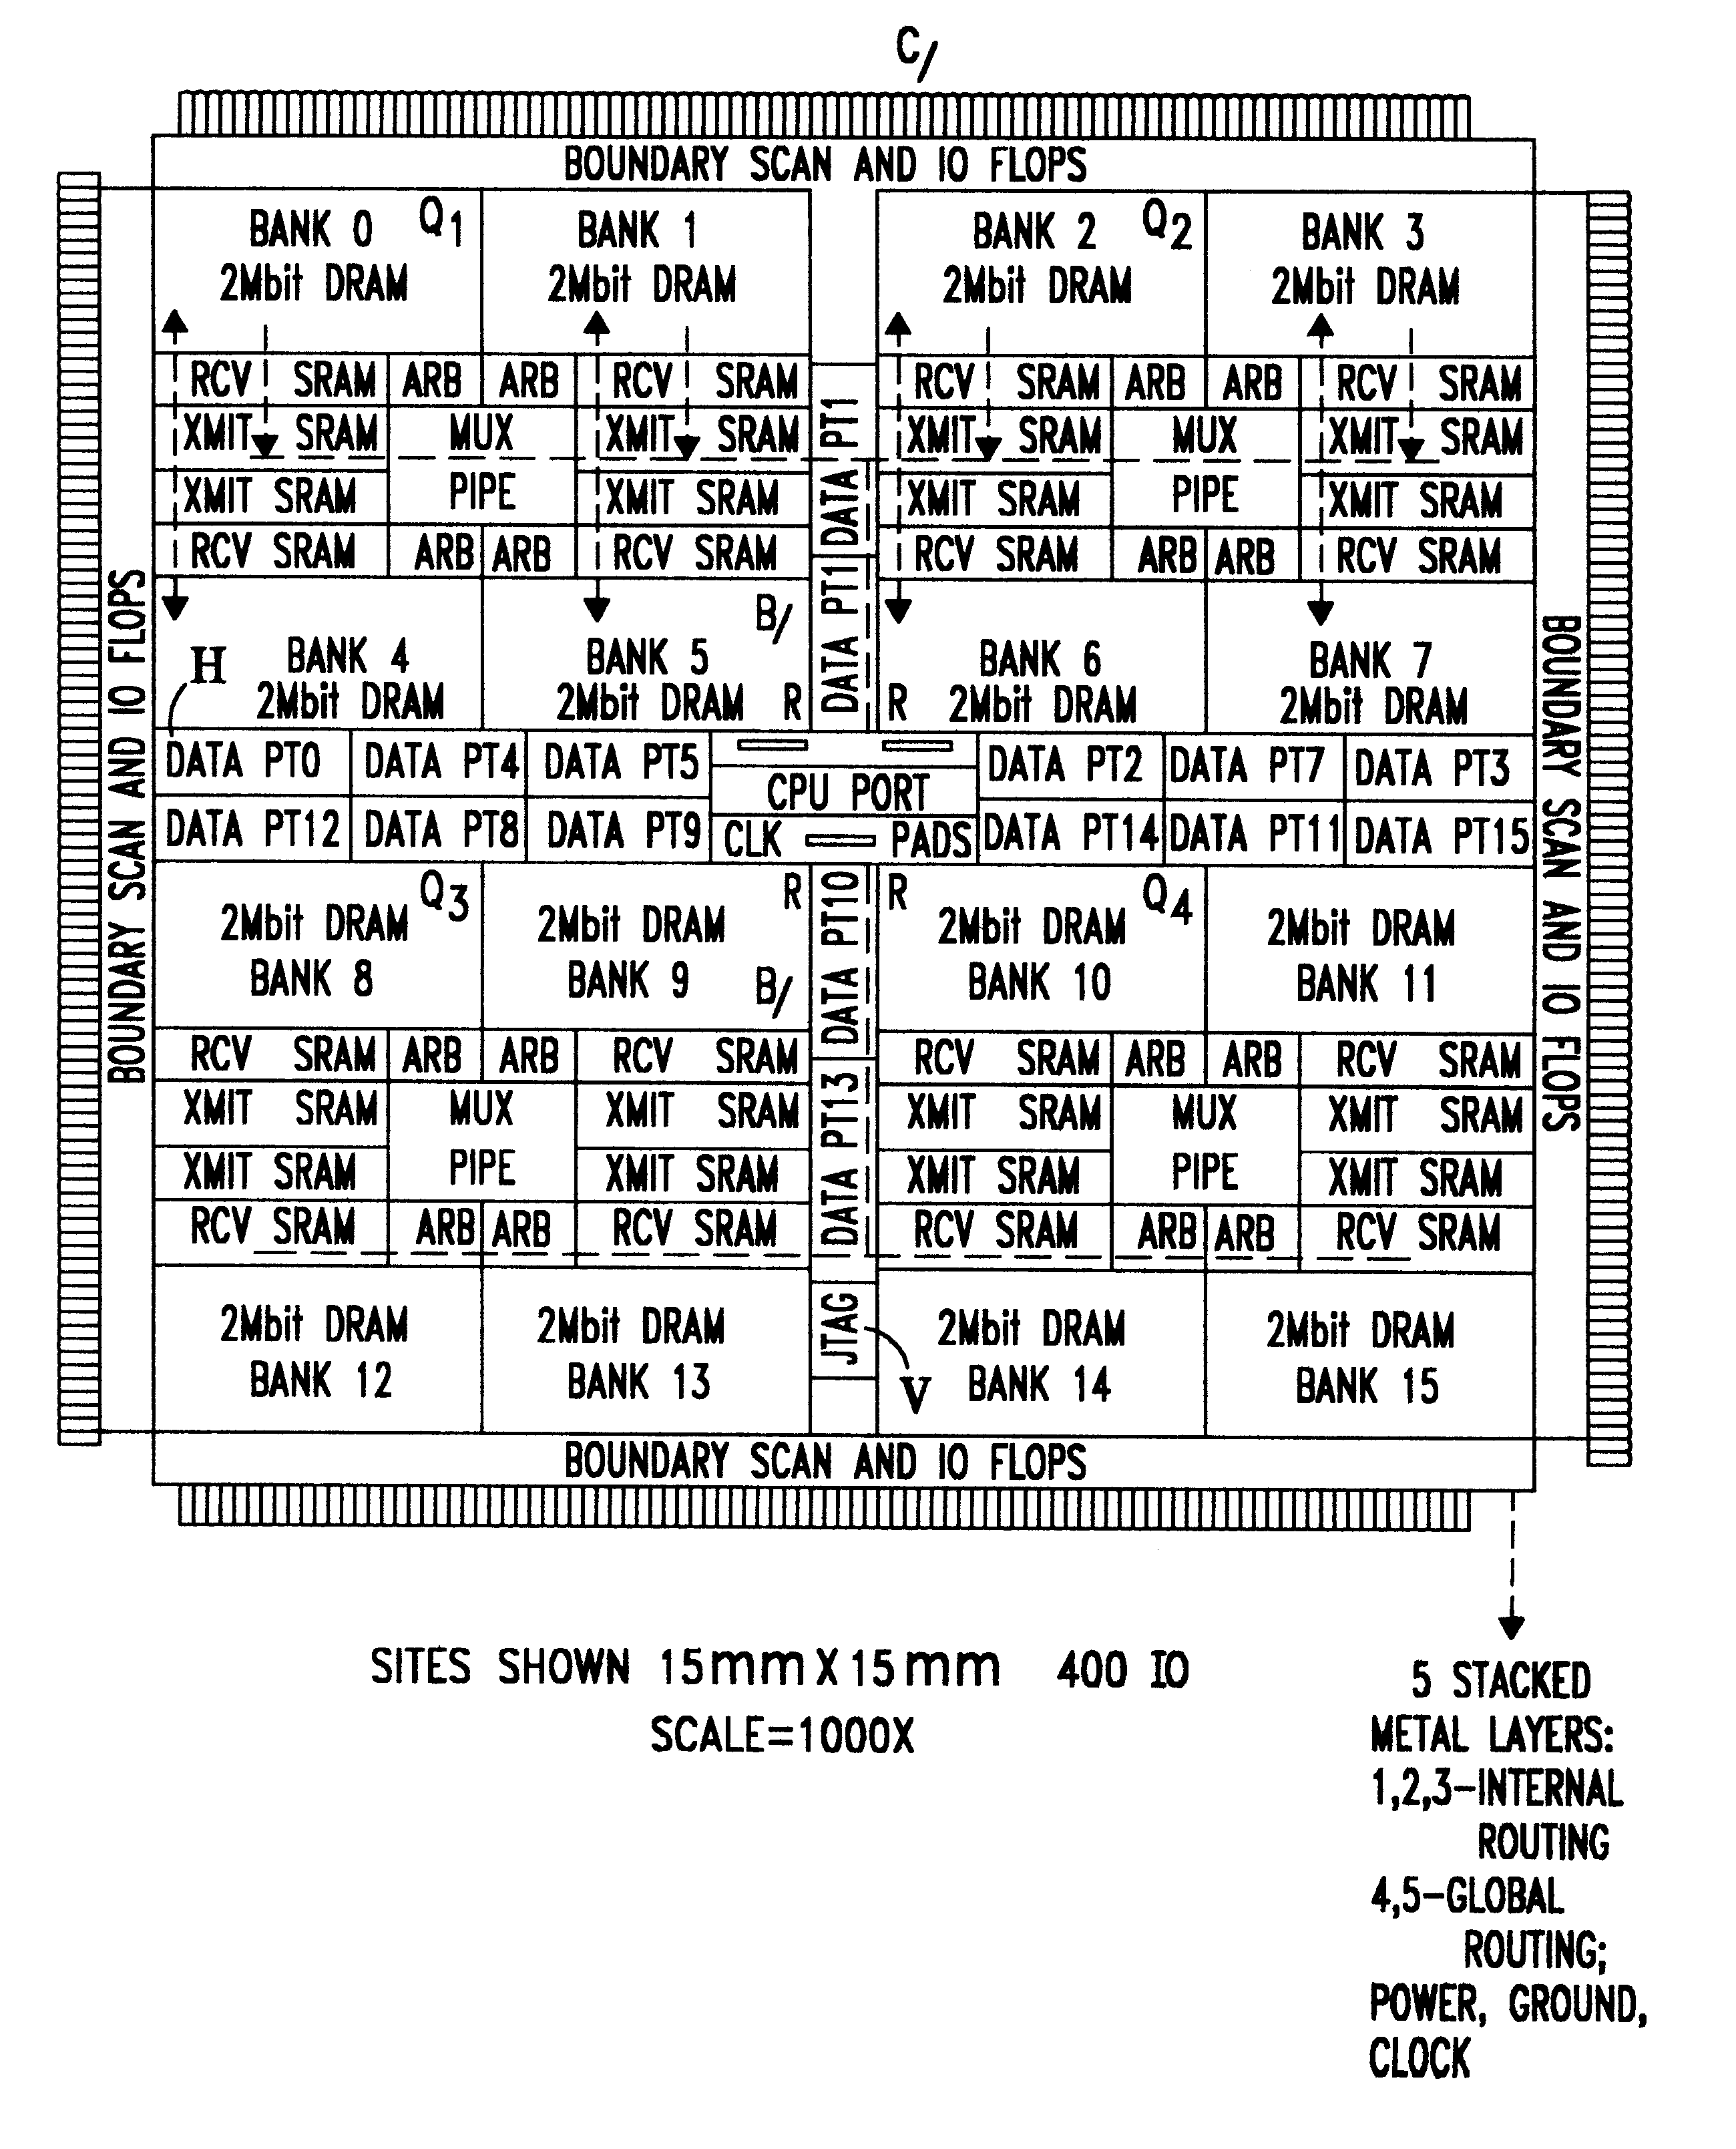 Chip layout for implementing arbitrated high speed switching access of pluralities of I/O data ports to internally cached DRAM banks and the like